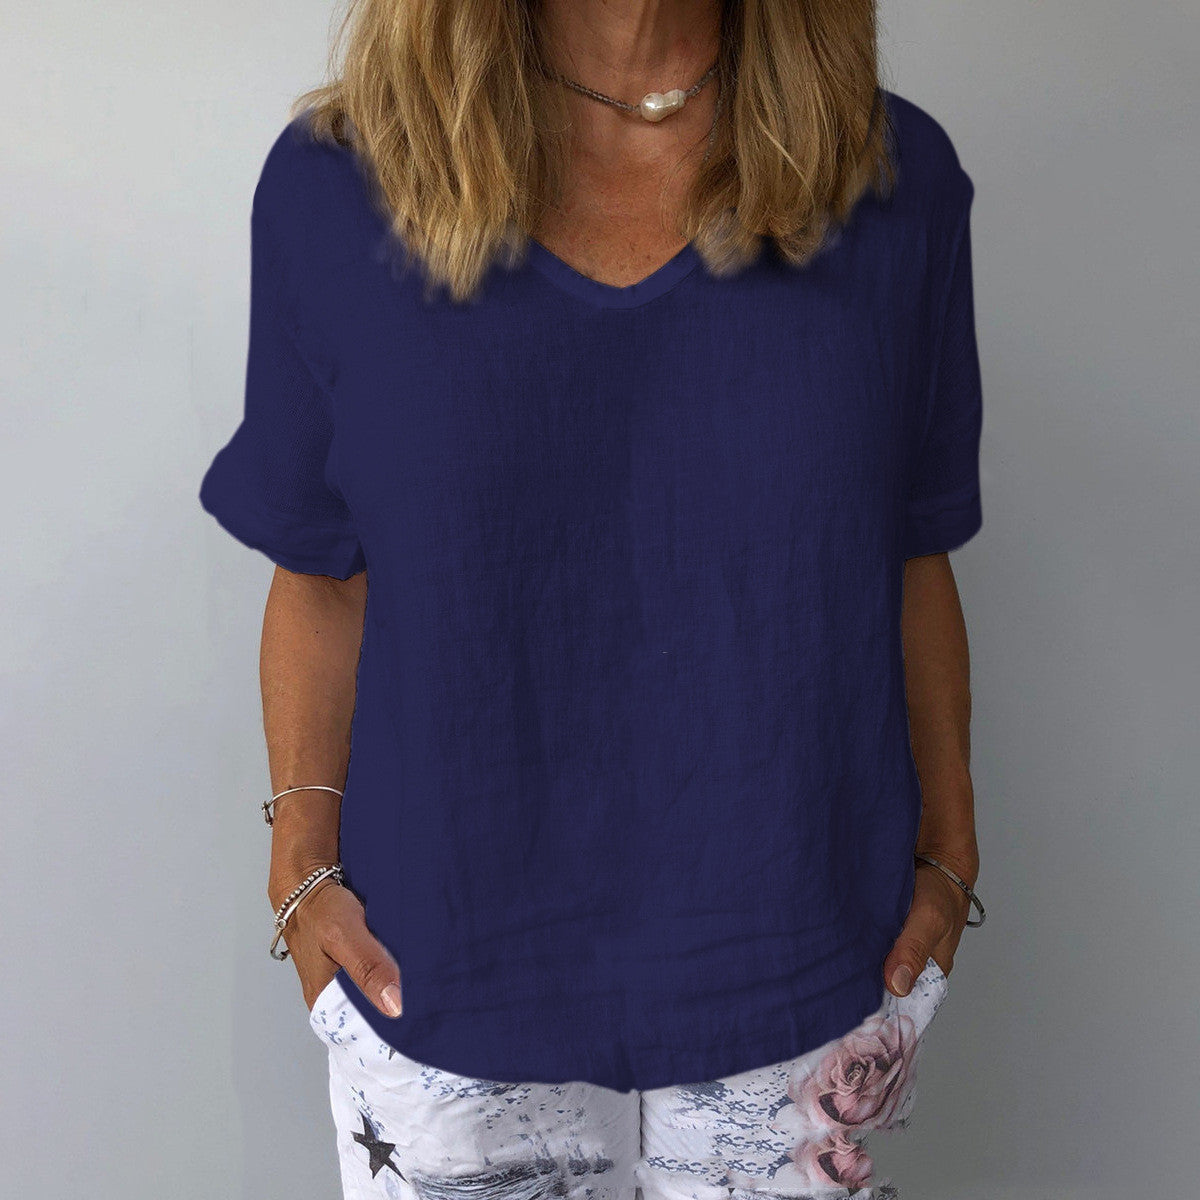 Loose Casual Top in Solid Color, Short-Sleeved, and Made of Cotton and Linen